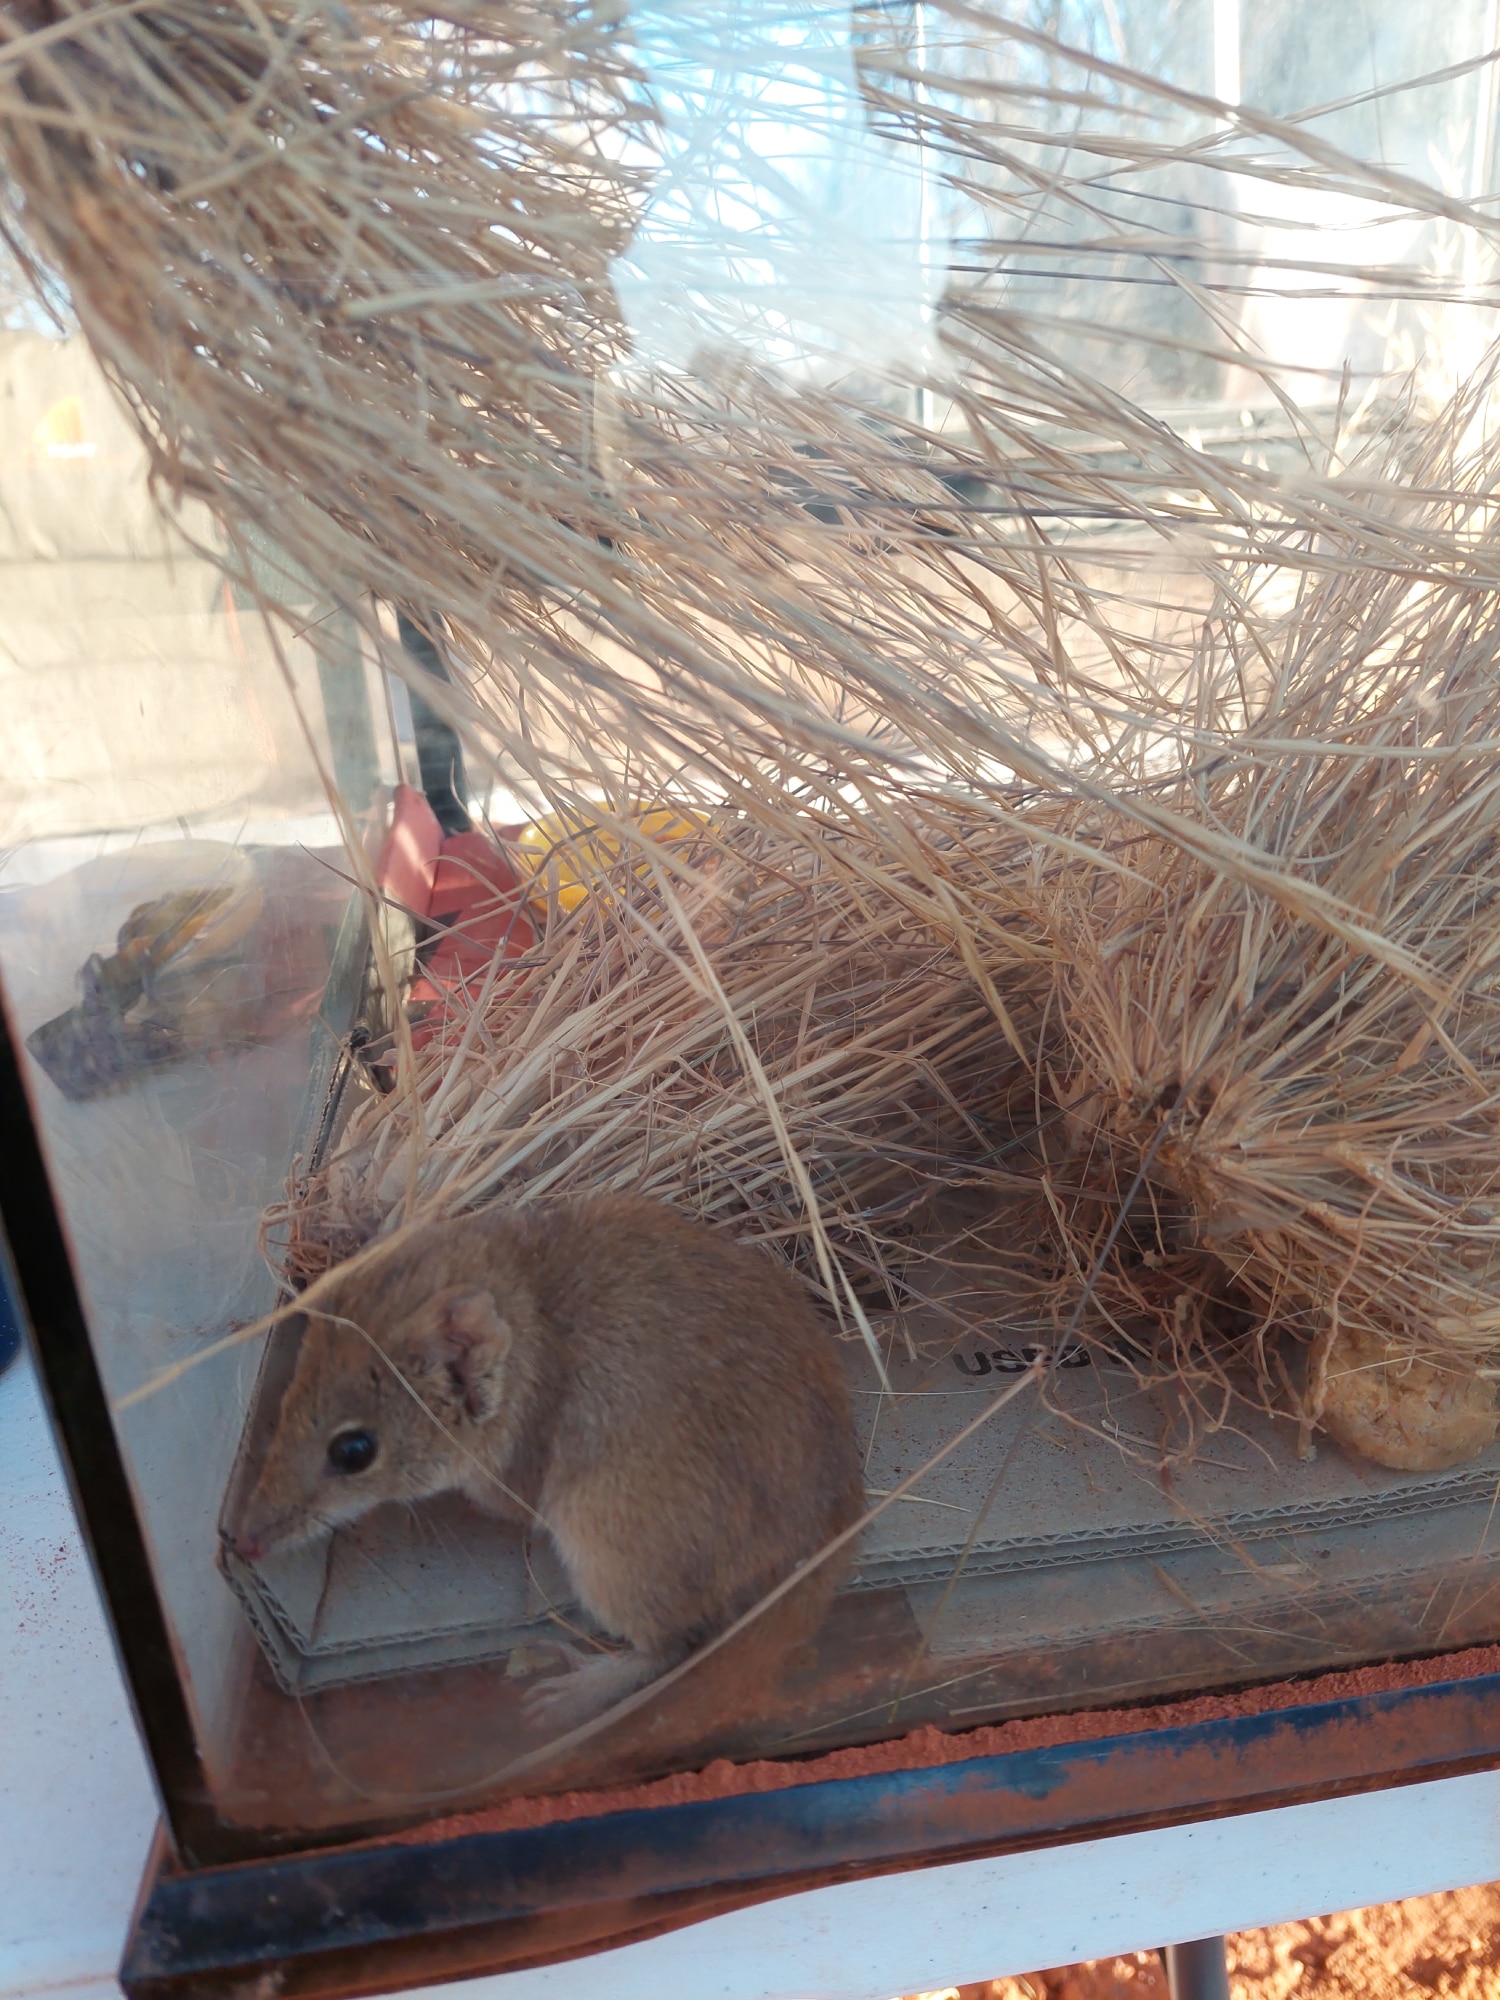 A mouse-like marsupial among long grass in a glass enclosure.